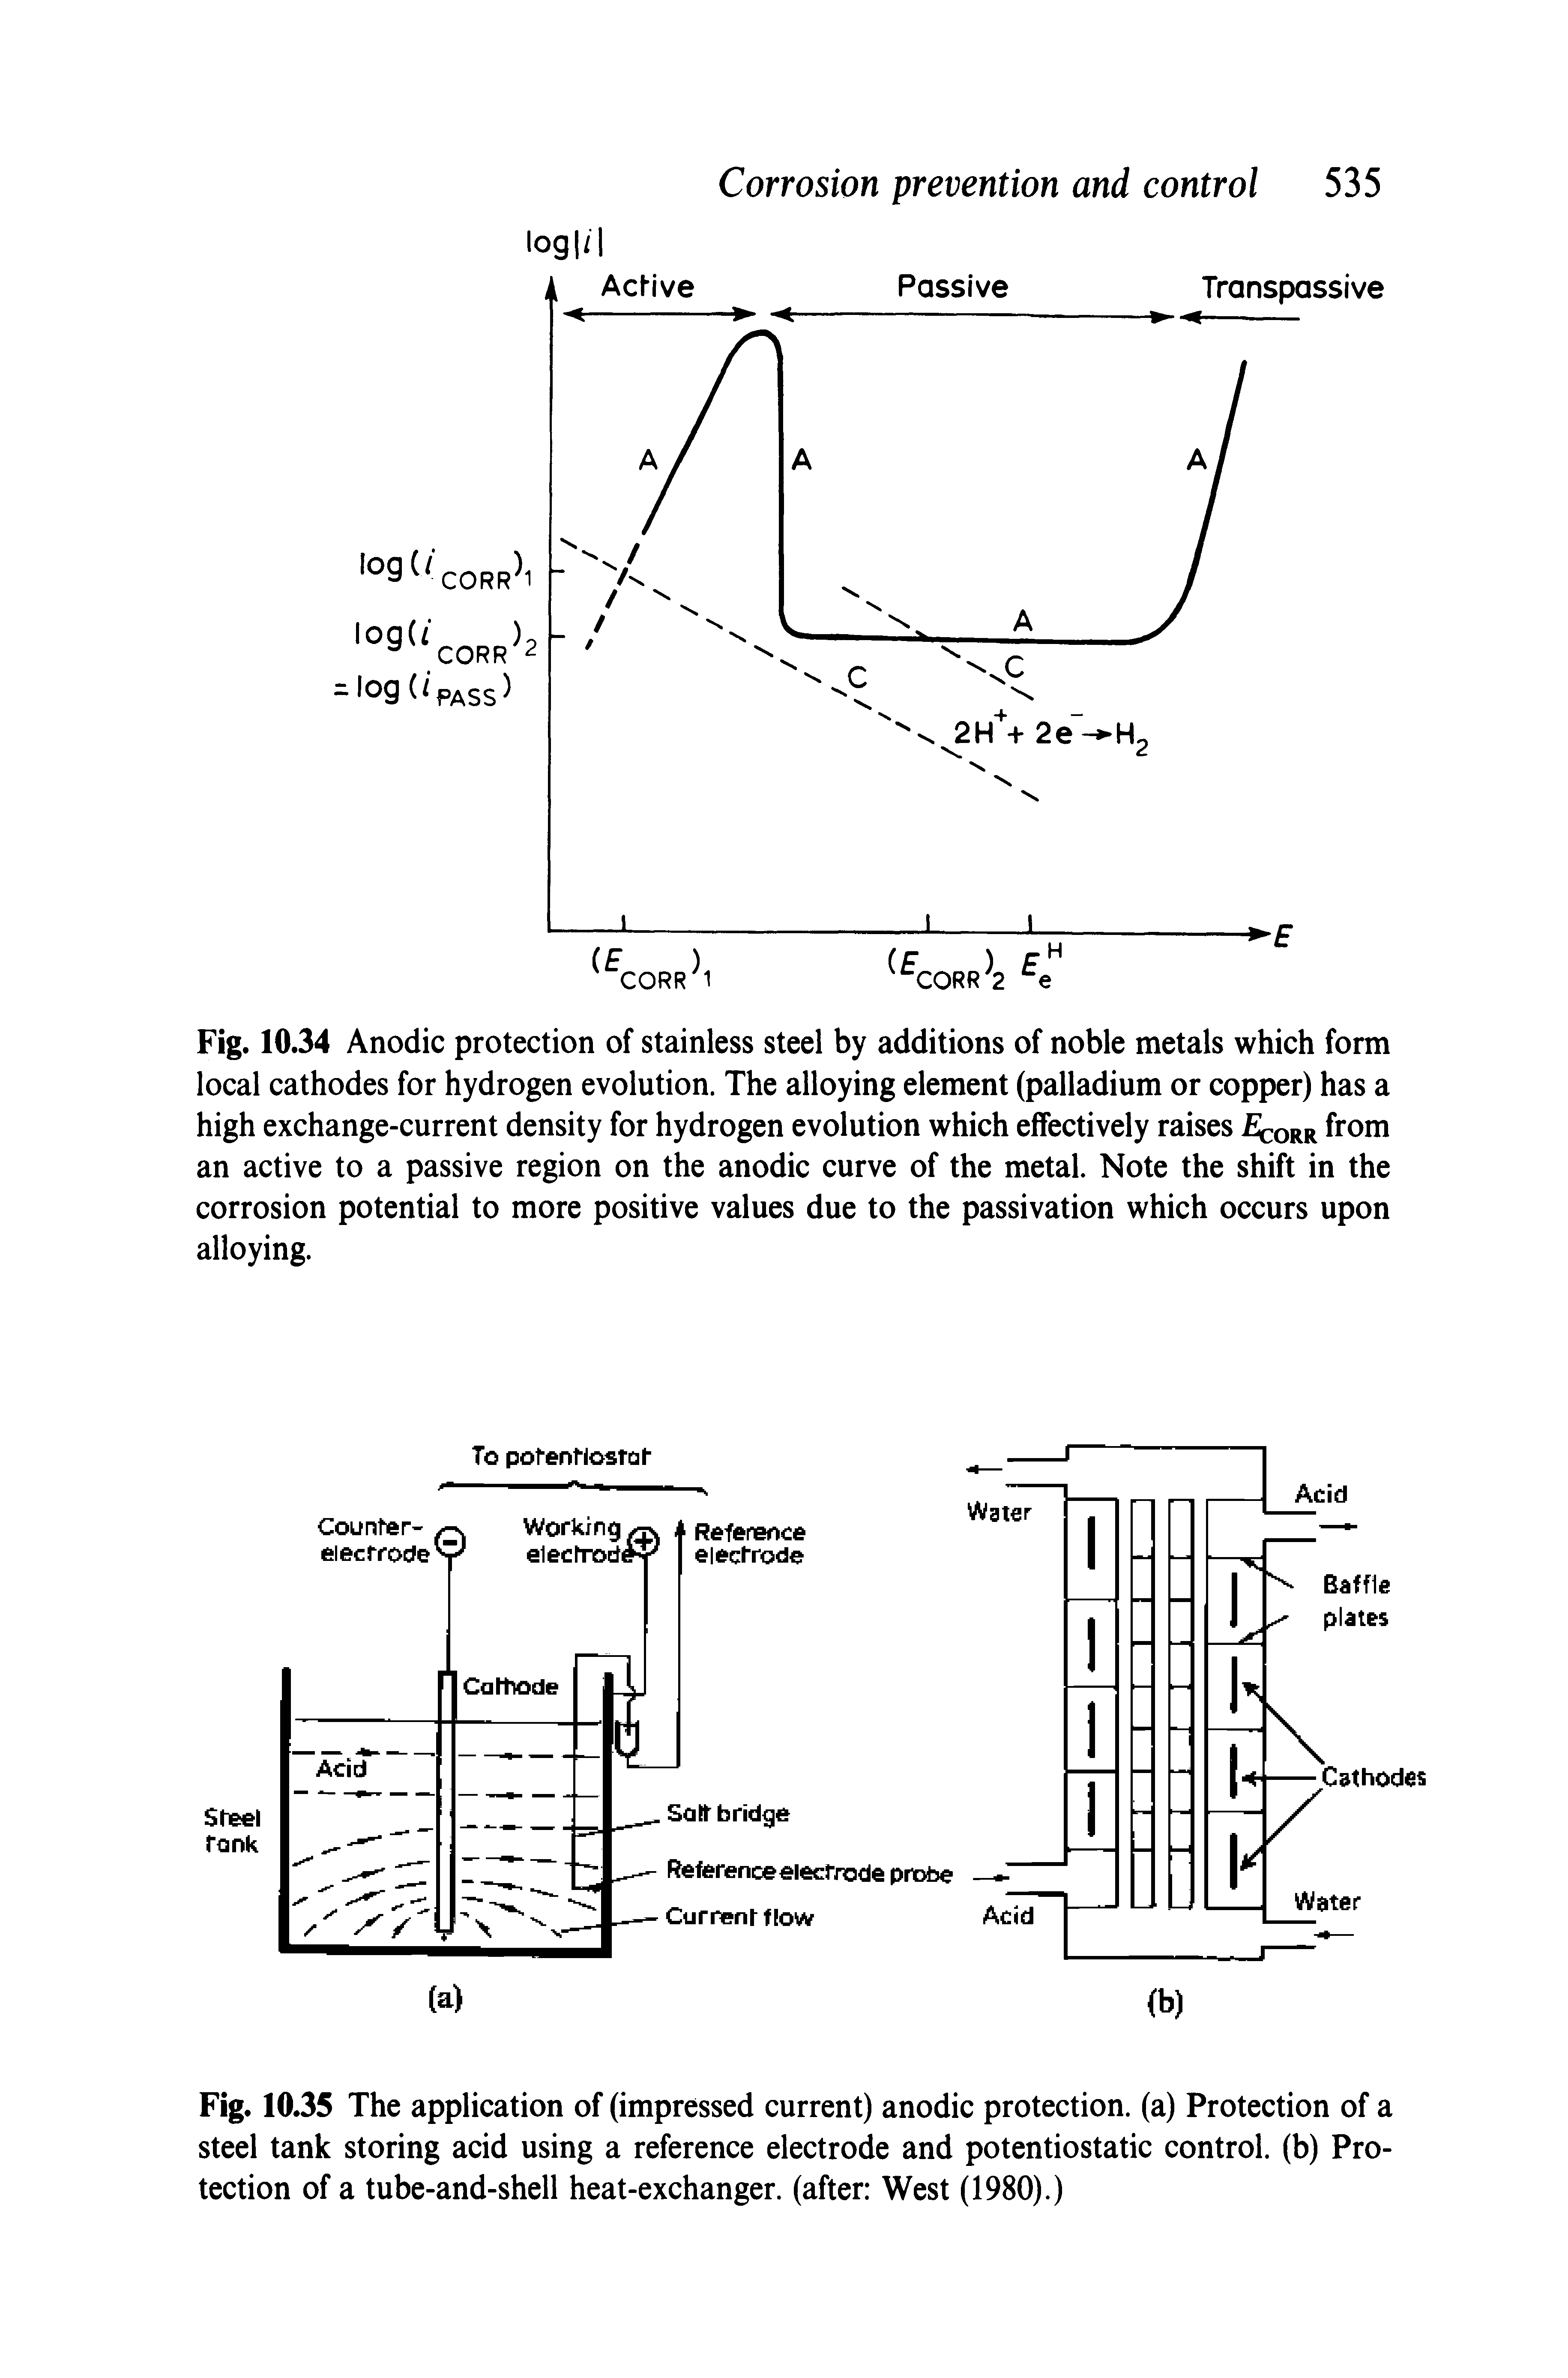 Fig. 10.34 Anodic protection of stainless steel by additions of noble metals which form local cathodes for hydrogen evolution. The alloying element (palladium or copper) has a high exchange-current density for hydrogen evolution which effectively raises Ecorr from an active to a passive region on the anodic curve of the metal. Note the shift in the corrosion potential to more positive values due to the passivation which occurs upon alloying.